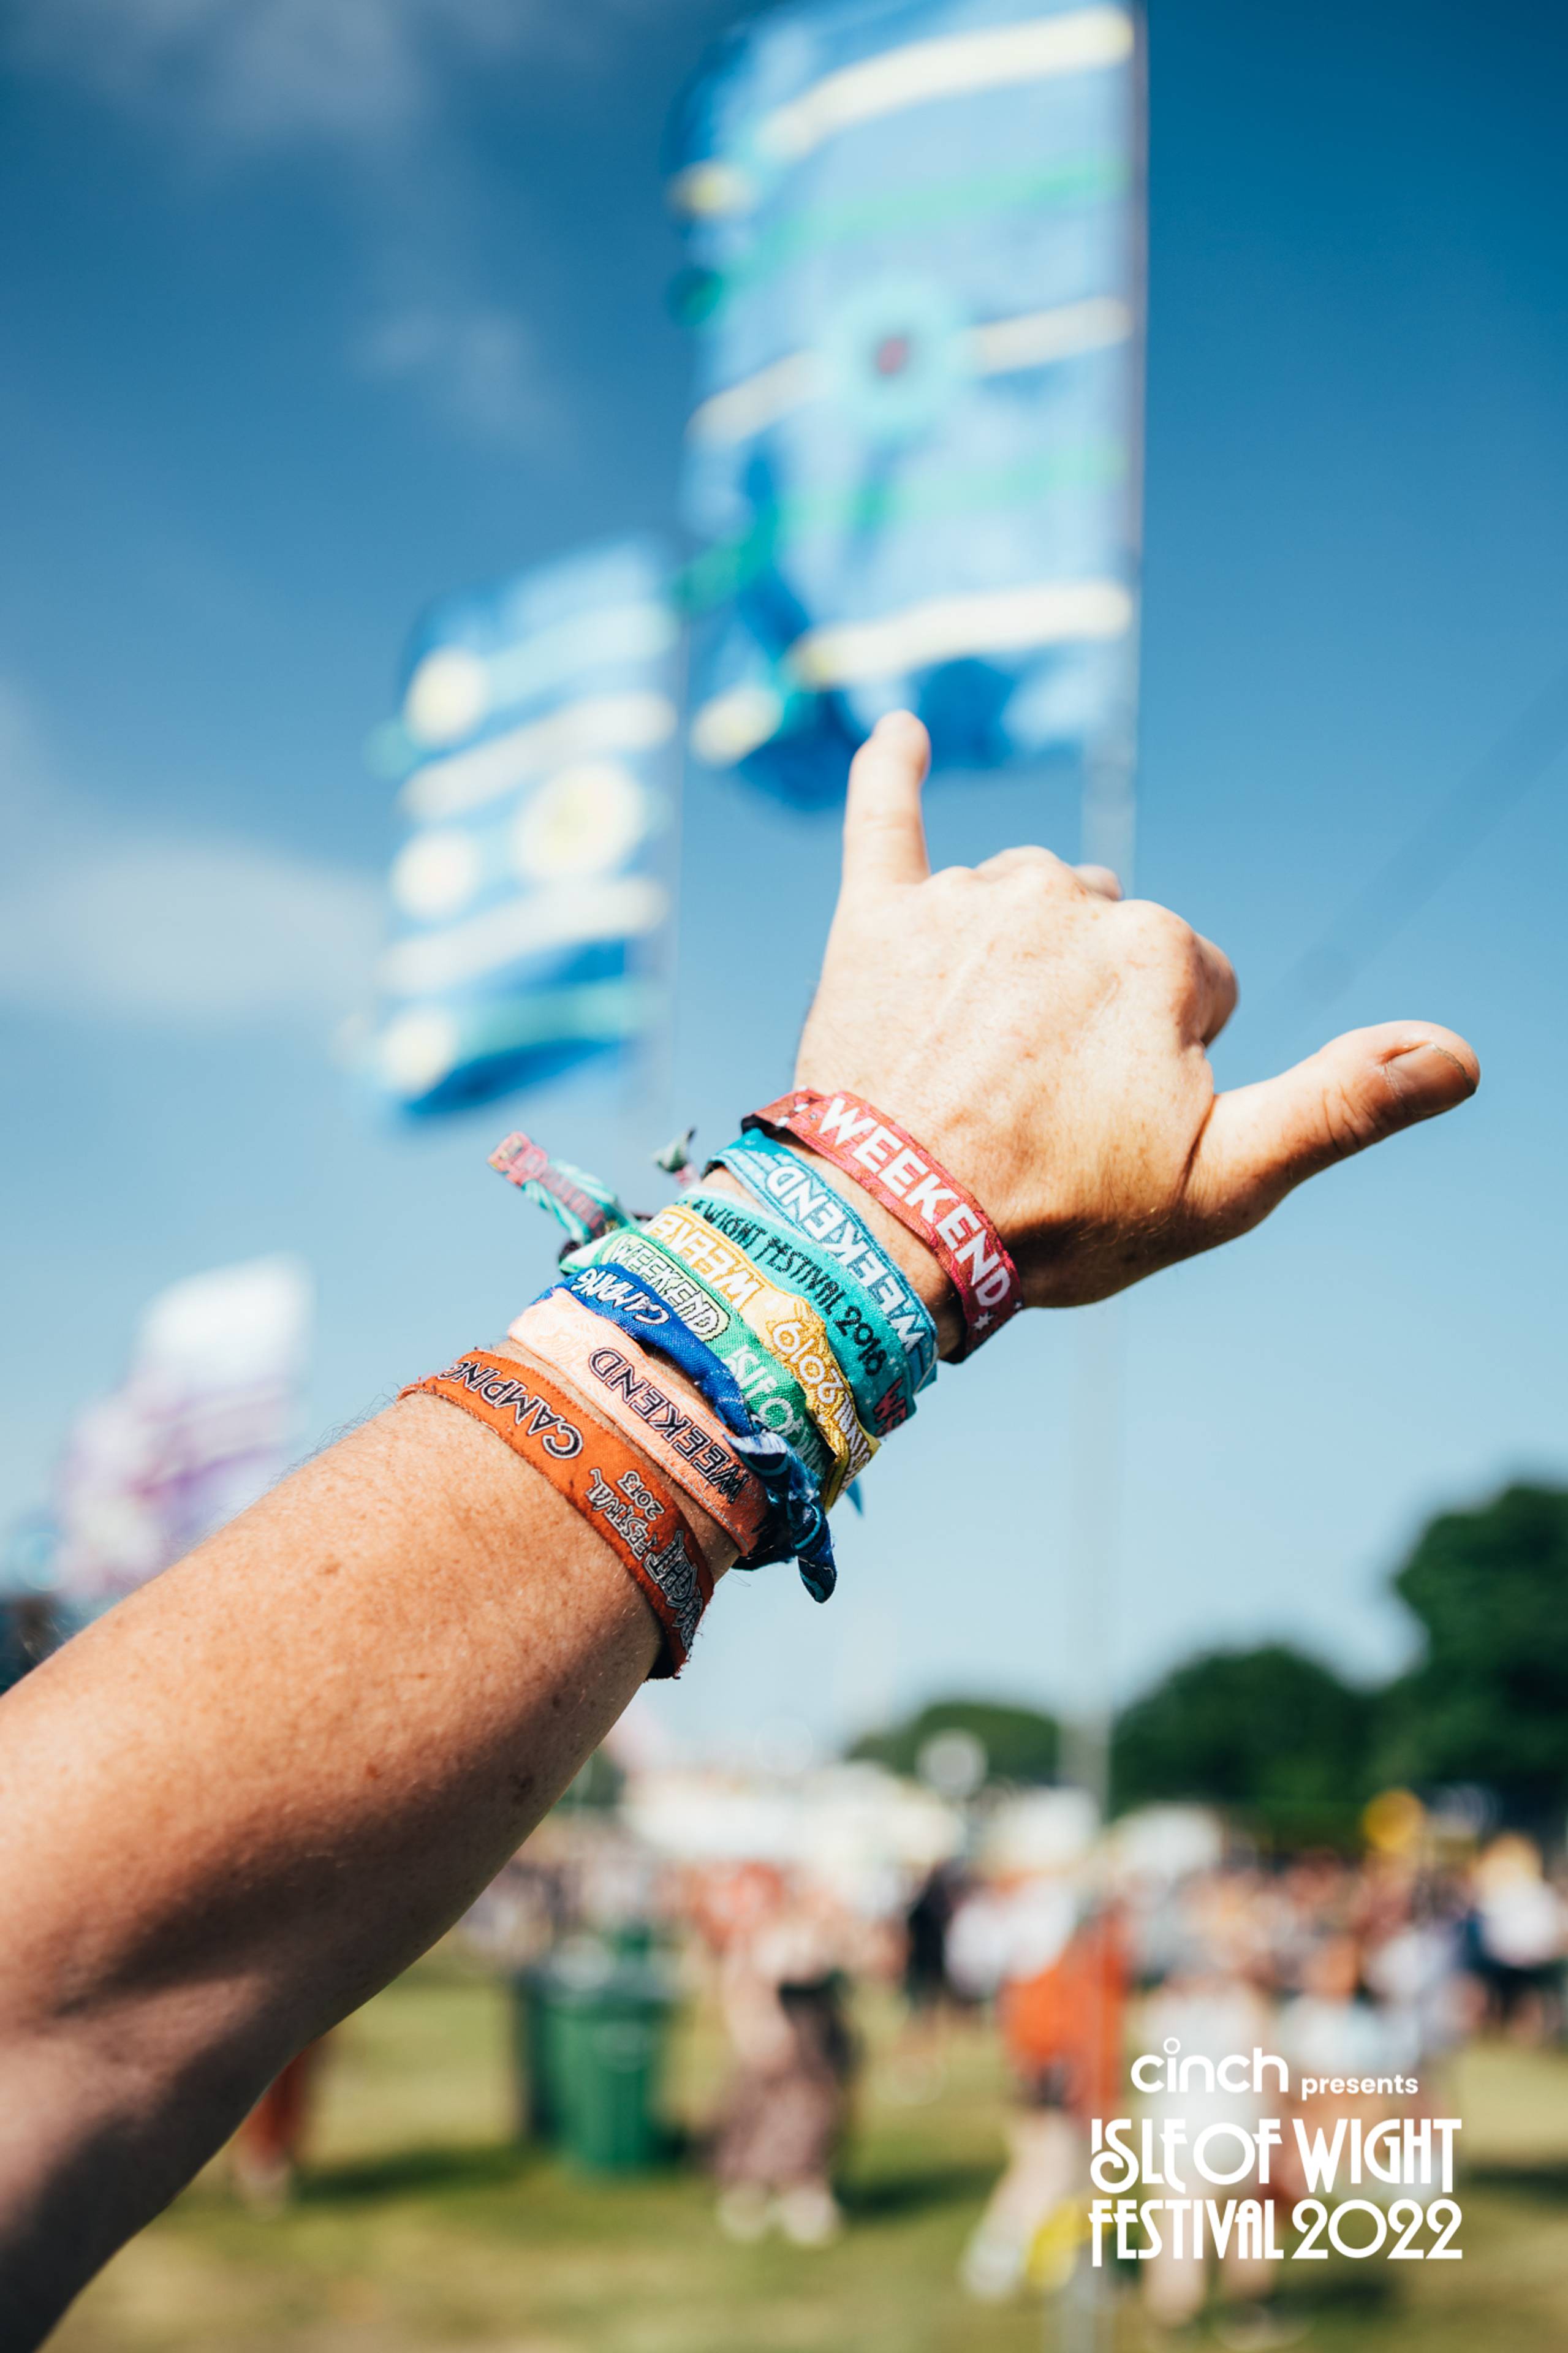 Someone's arm sticking out with 8 festival wristbands